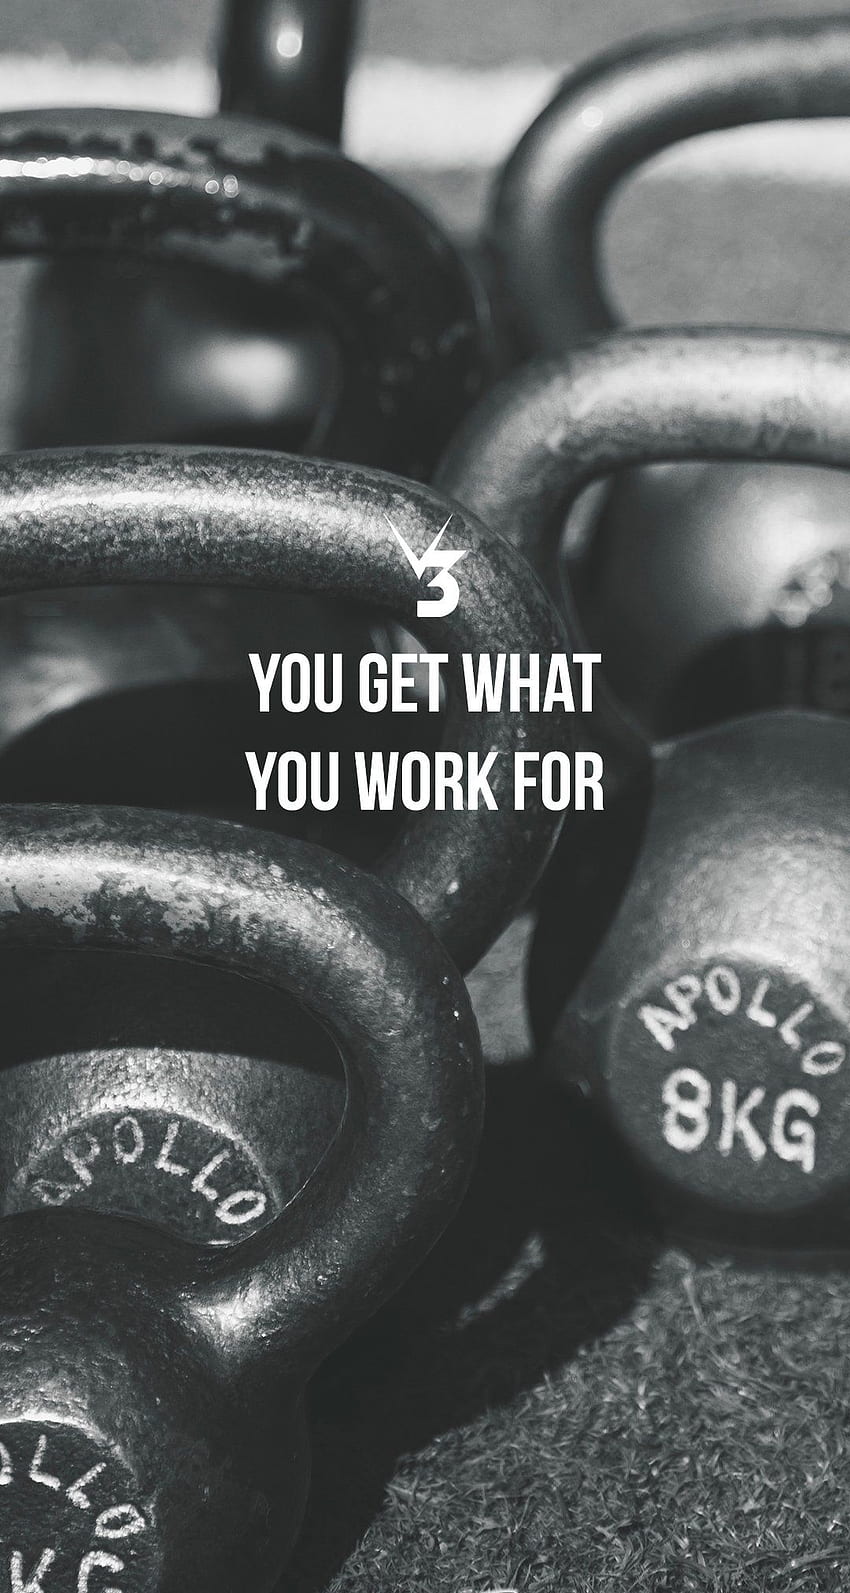 Free Motivational Fitness & Life Phone Wallpapers – V3 Apparel